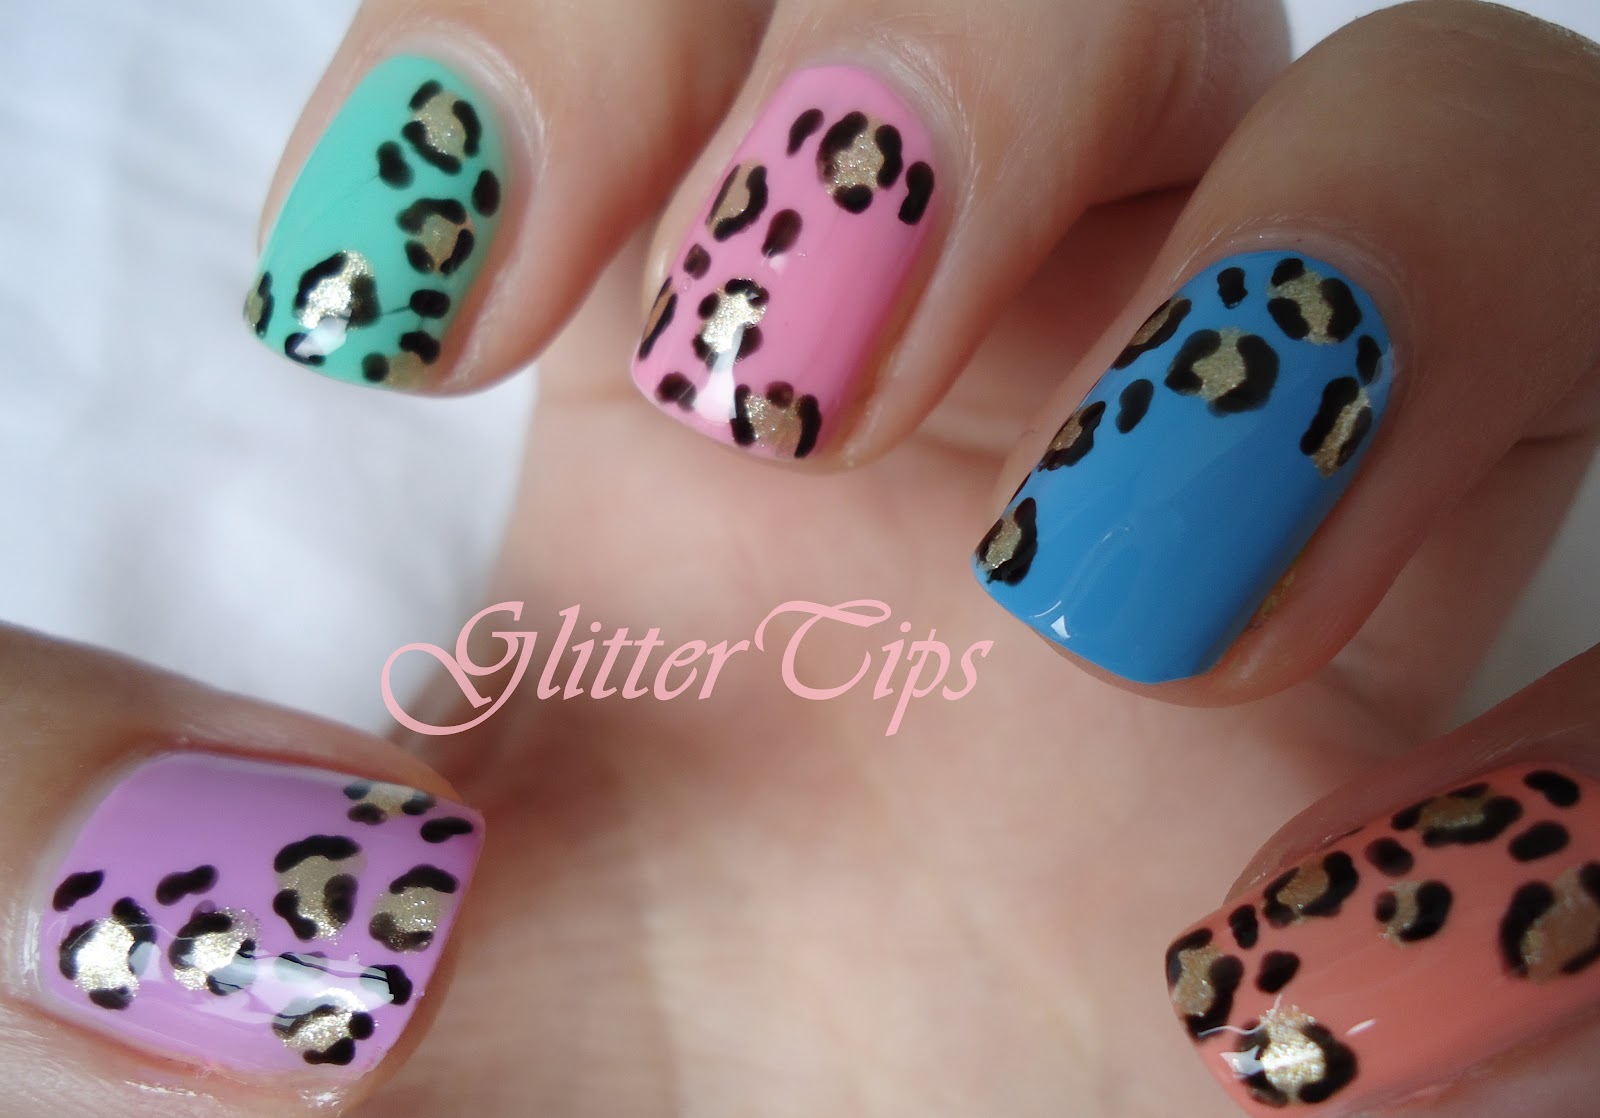 Glitter Tips: Makeup Savvy 15 Day Nail Challenge - Day 8 - Leopard Print